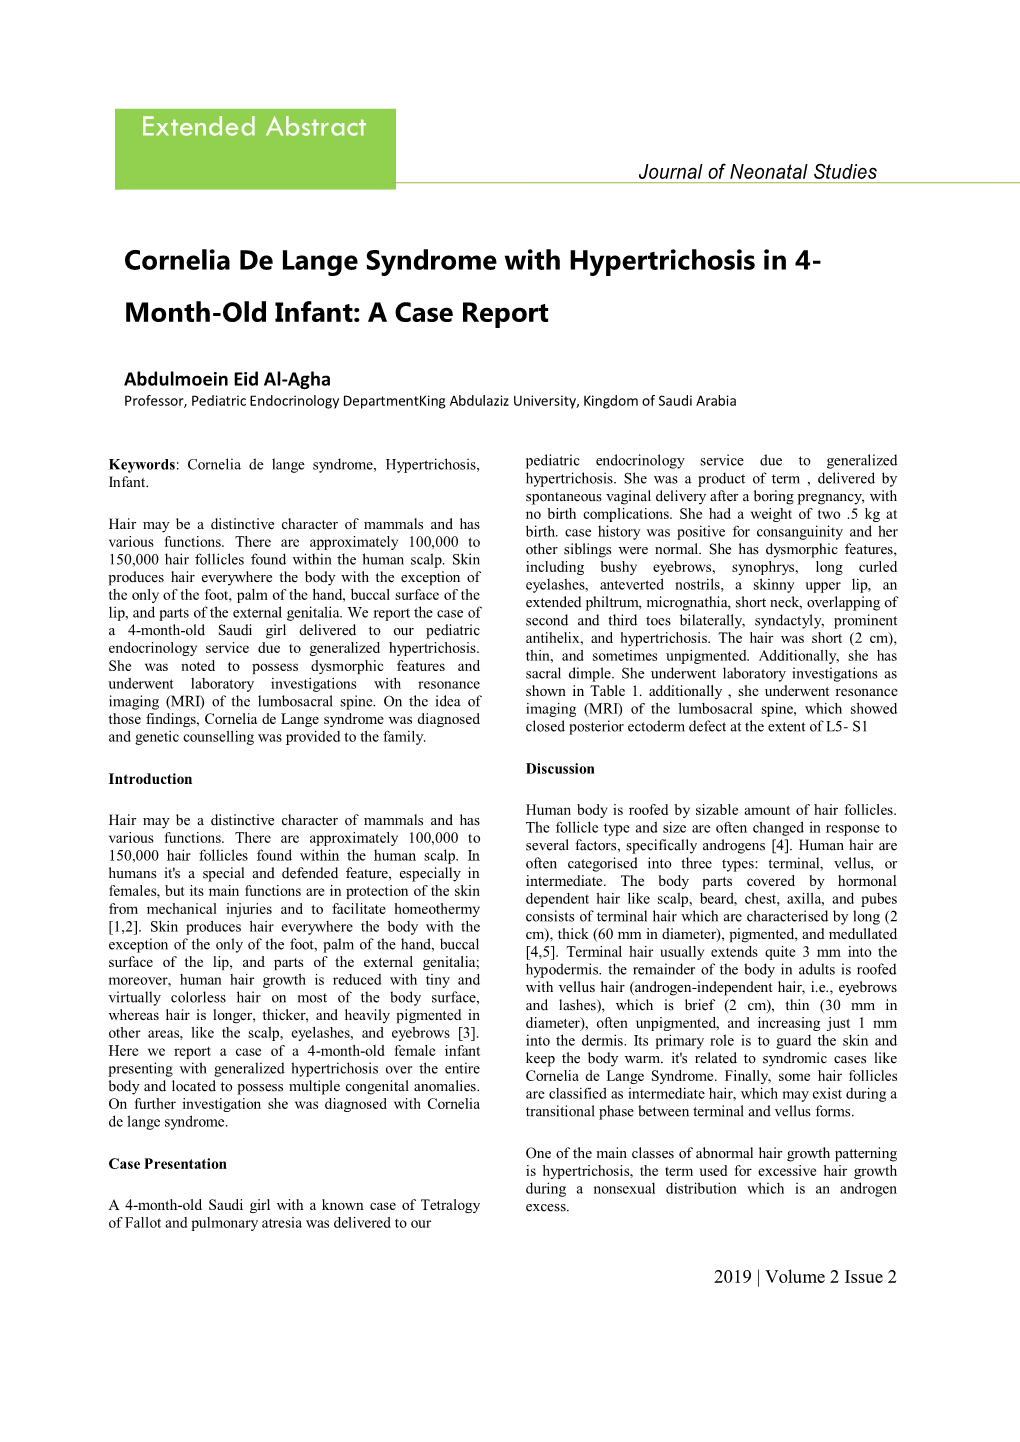 Cornelia De Lange Syndrome with Hypertrichosis in 4- Month-Old Infant: a Case Report